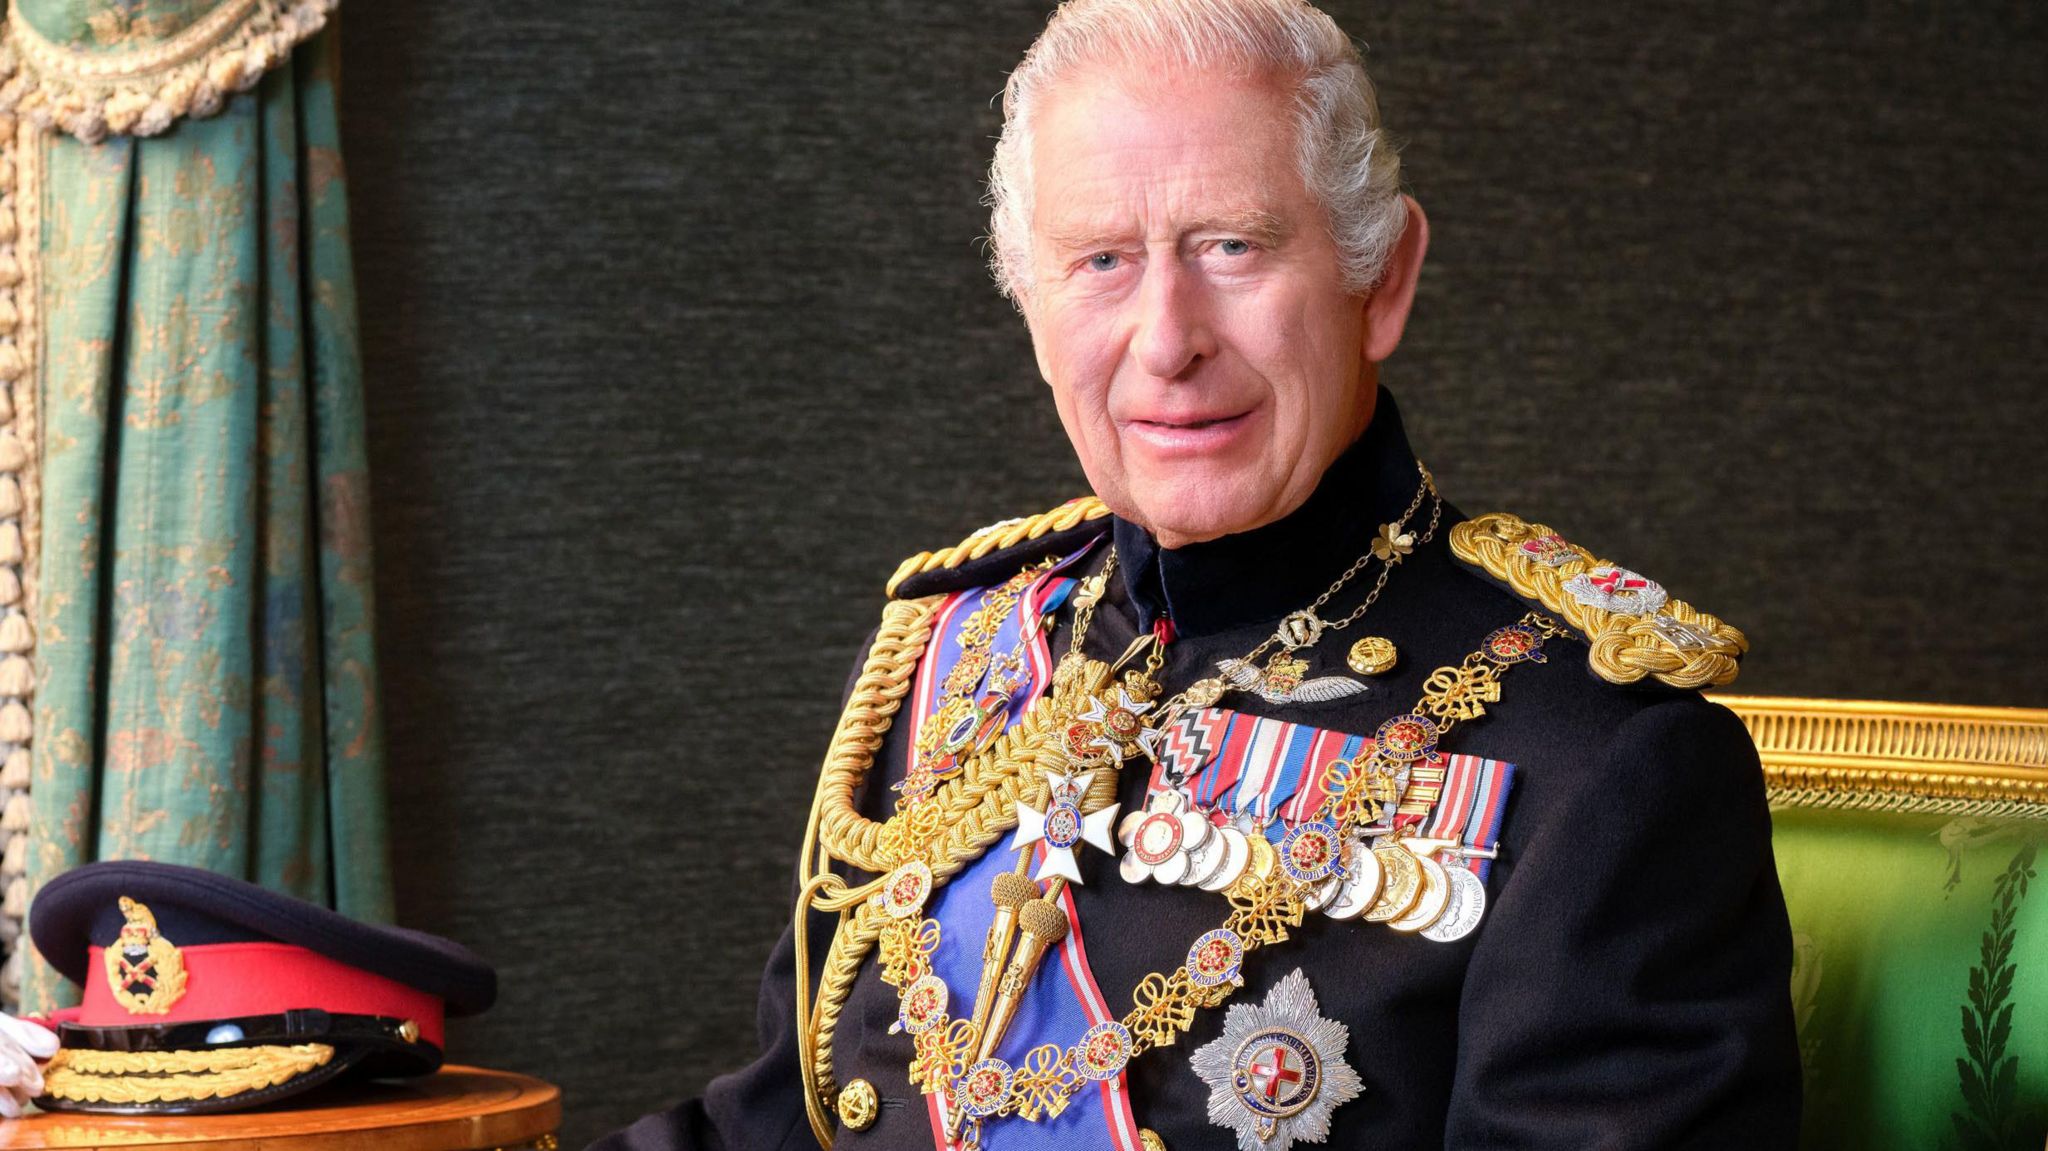 King Charles III sitting in the Grand Corridor at Windsor Castle, wearing his Field Marshal No1 Full Ceremonial Frock Coat with medals, sword and decorations. His Field Marshal cap, white gloves and baton are placed on the table beside him.